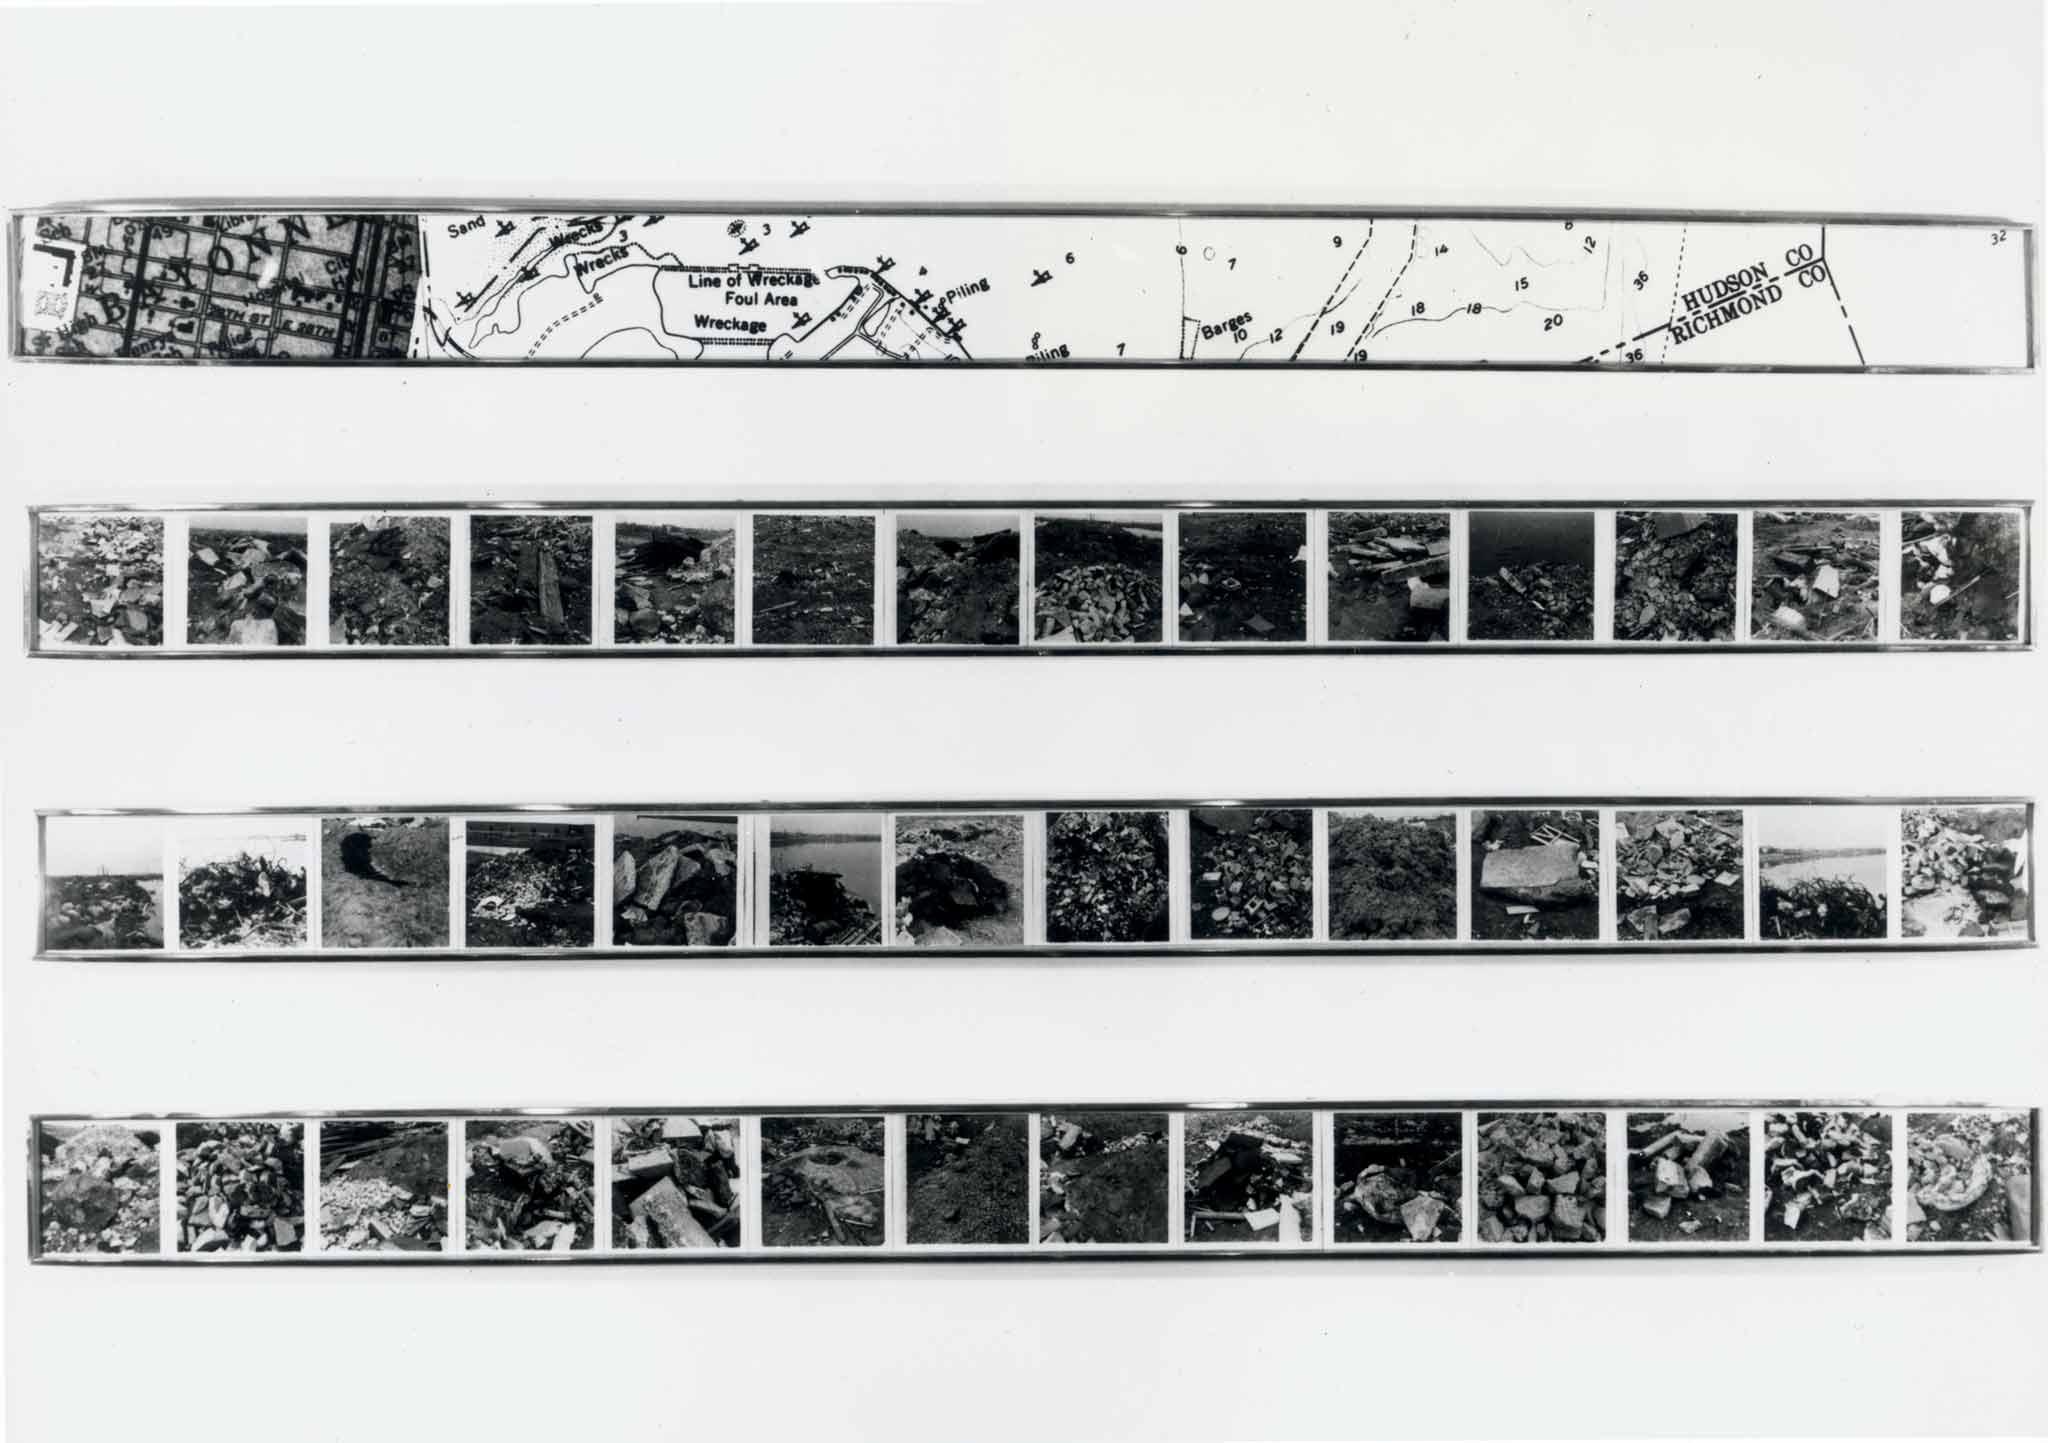 black and white image of four framed horizontal images.  The top frame contains a map and the bottom three contain multiple photographs